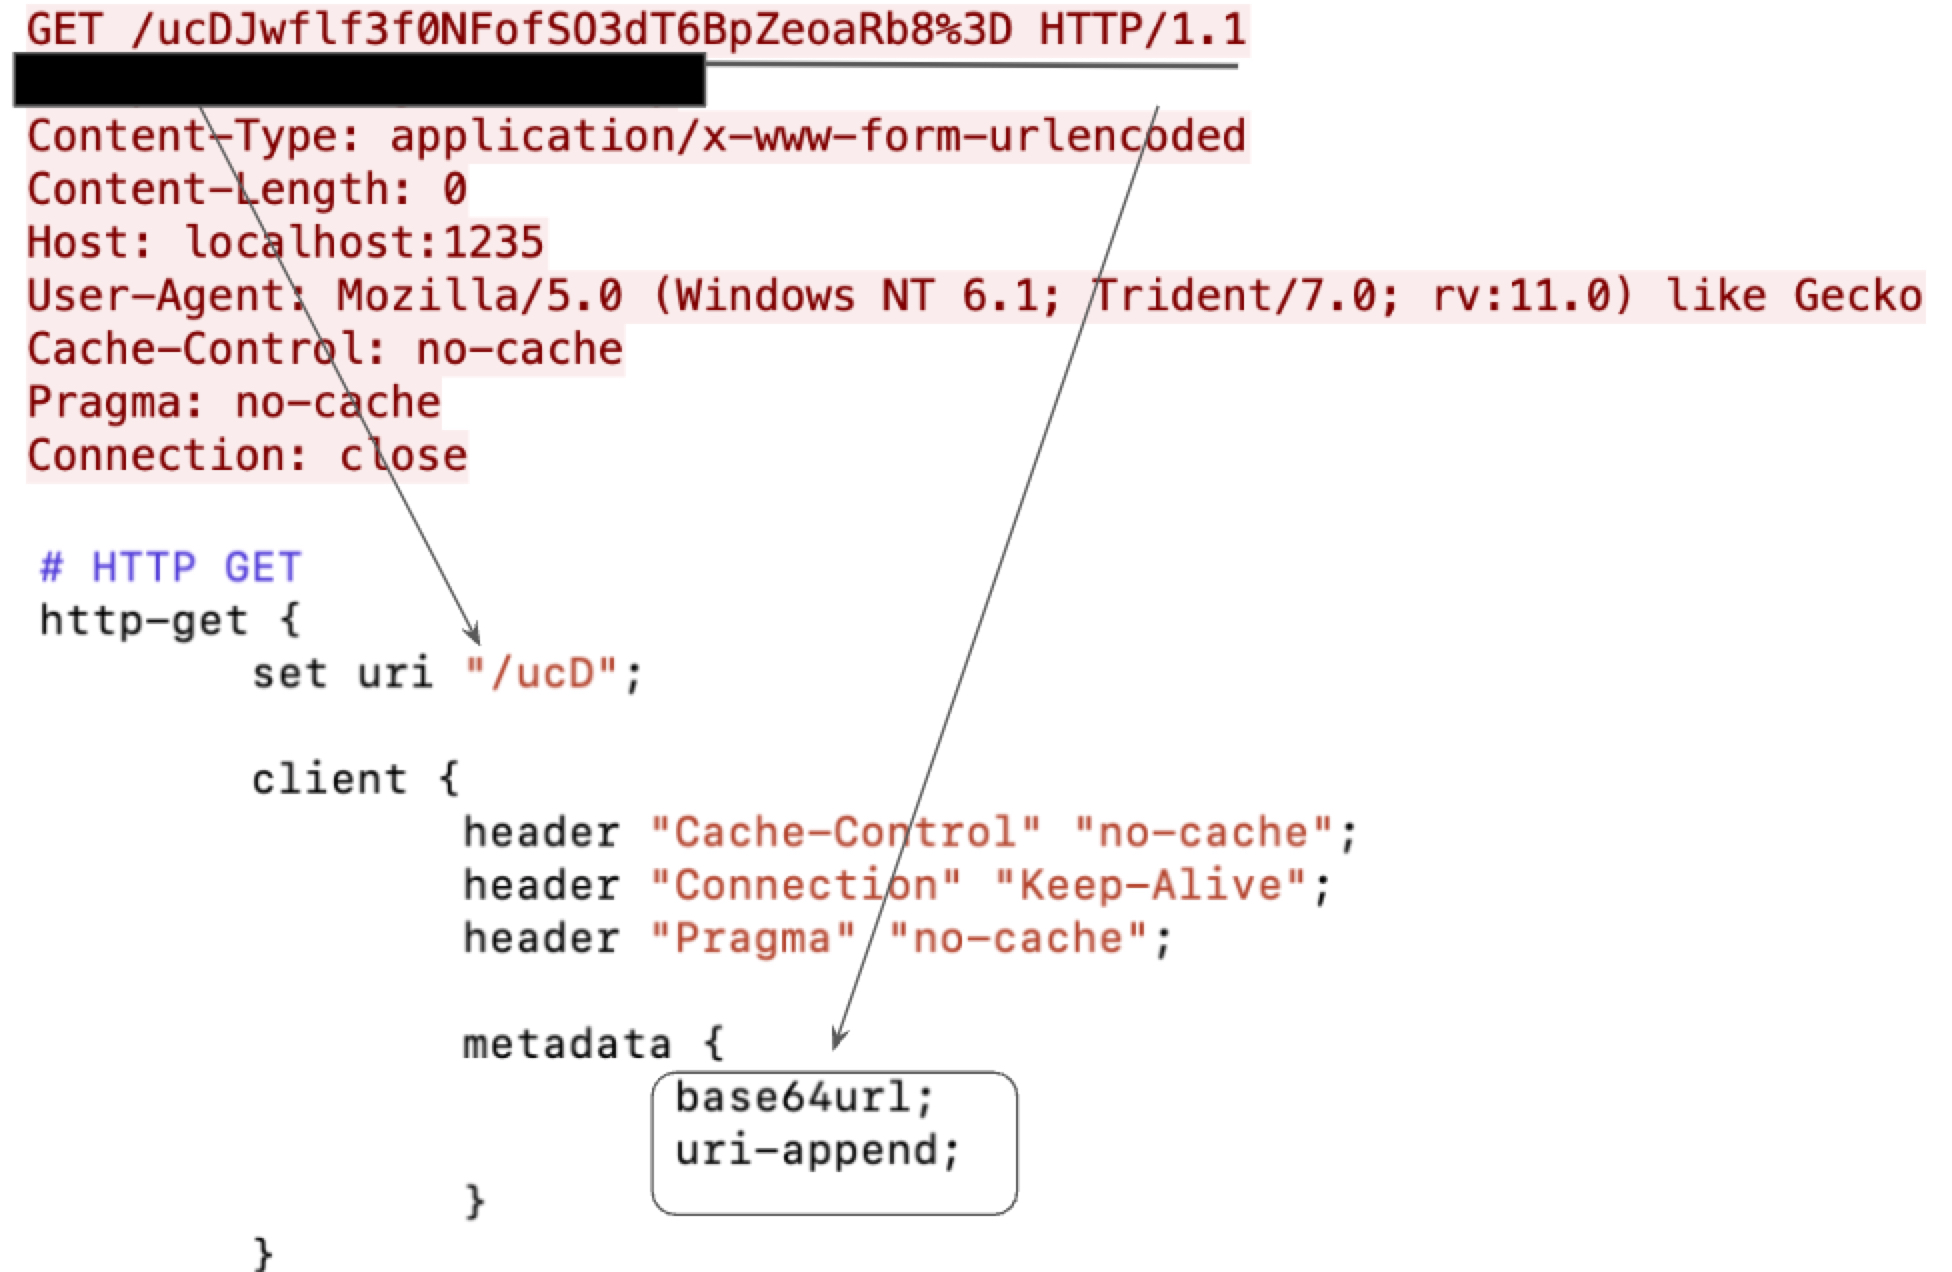 Image 5 is a screenshot of many lines of code. One line is redacted. Some of the information corresponds from the HTTP header to the mal.profile as indicated by black arrows. The redacted information is related to the /ucD line. 